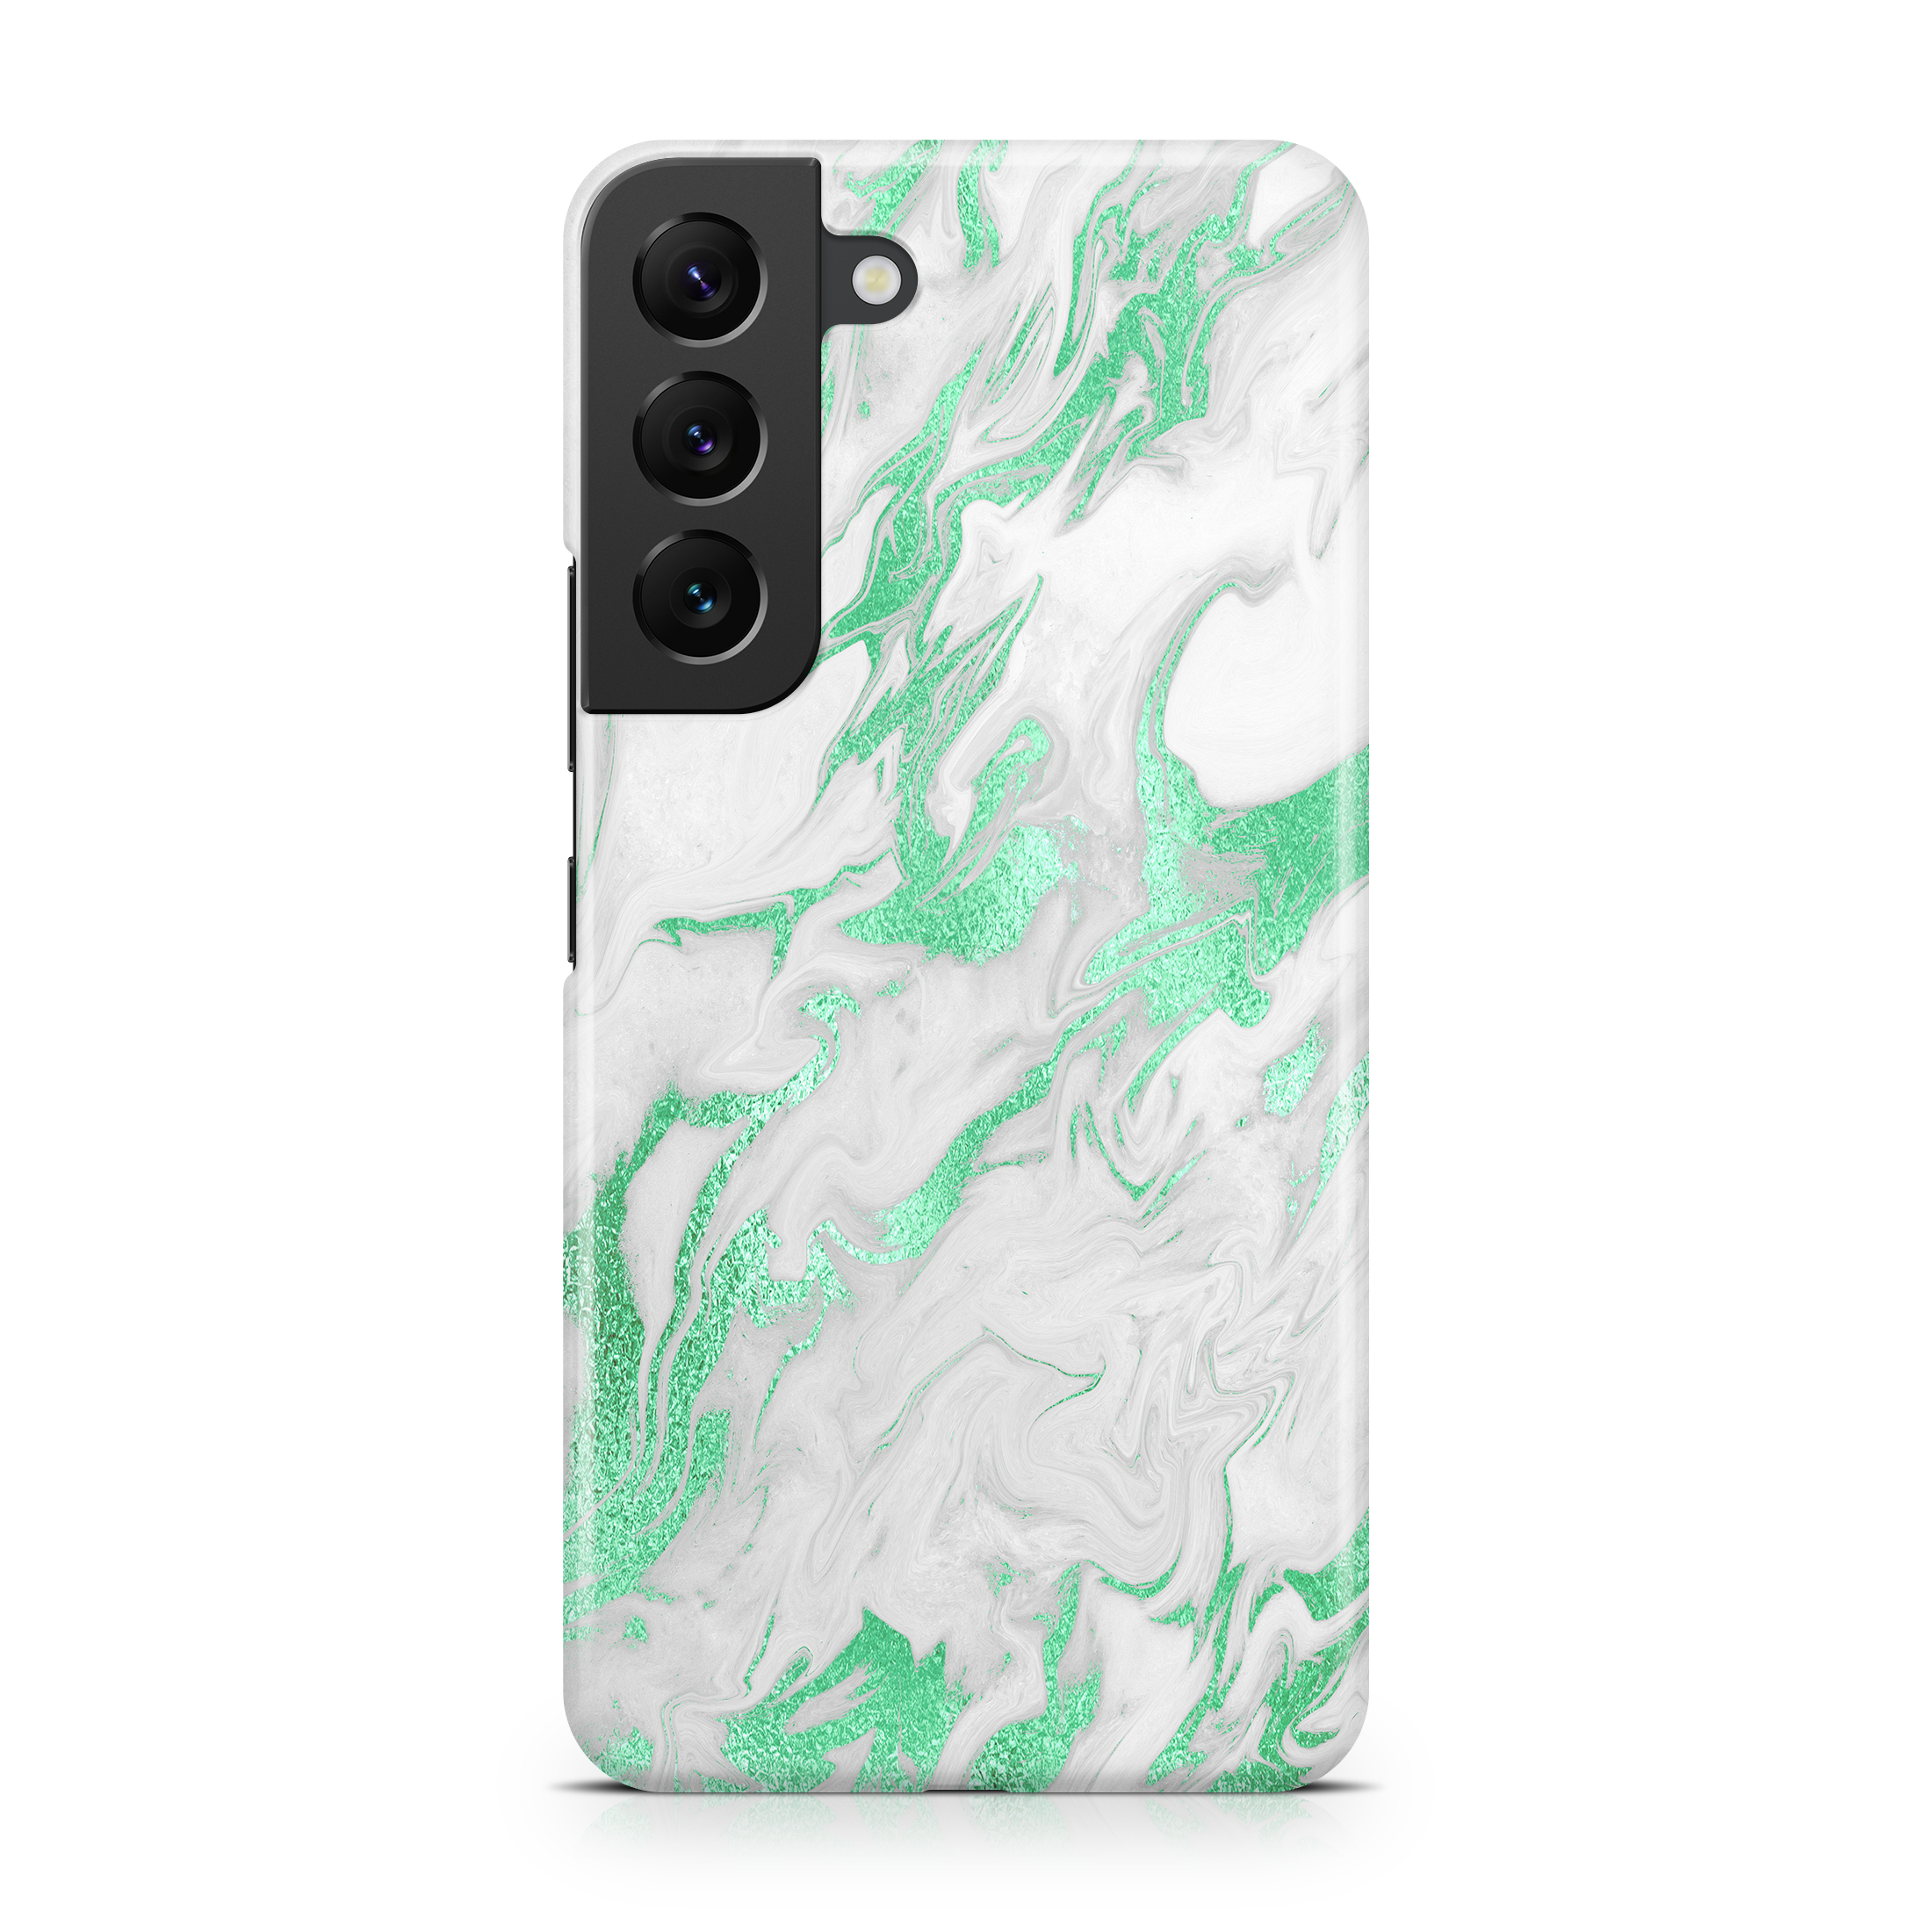 Mint White Marble - Samsung phone case designs by CaseSwagger